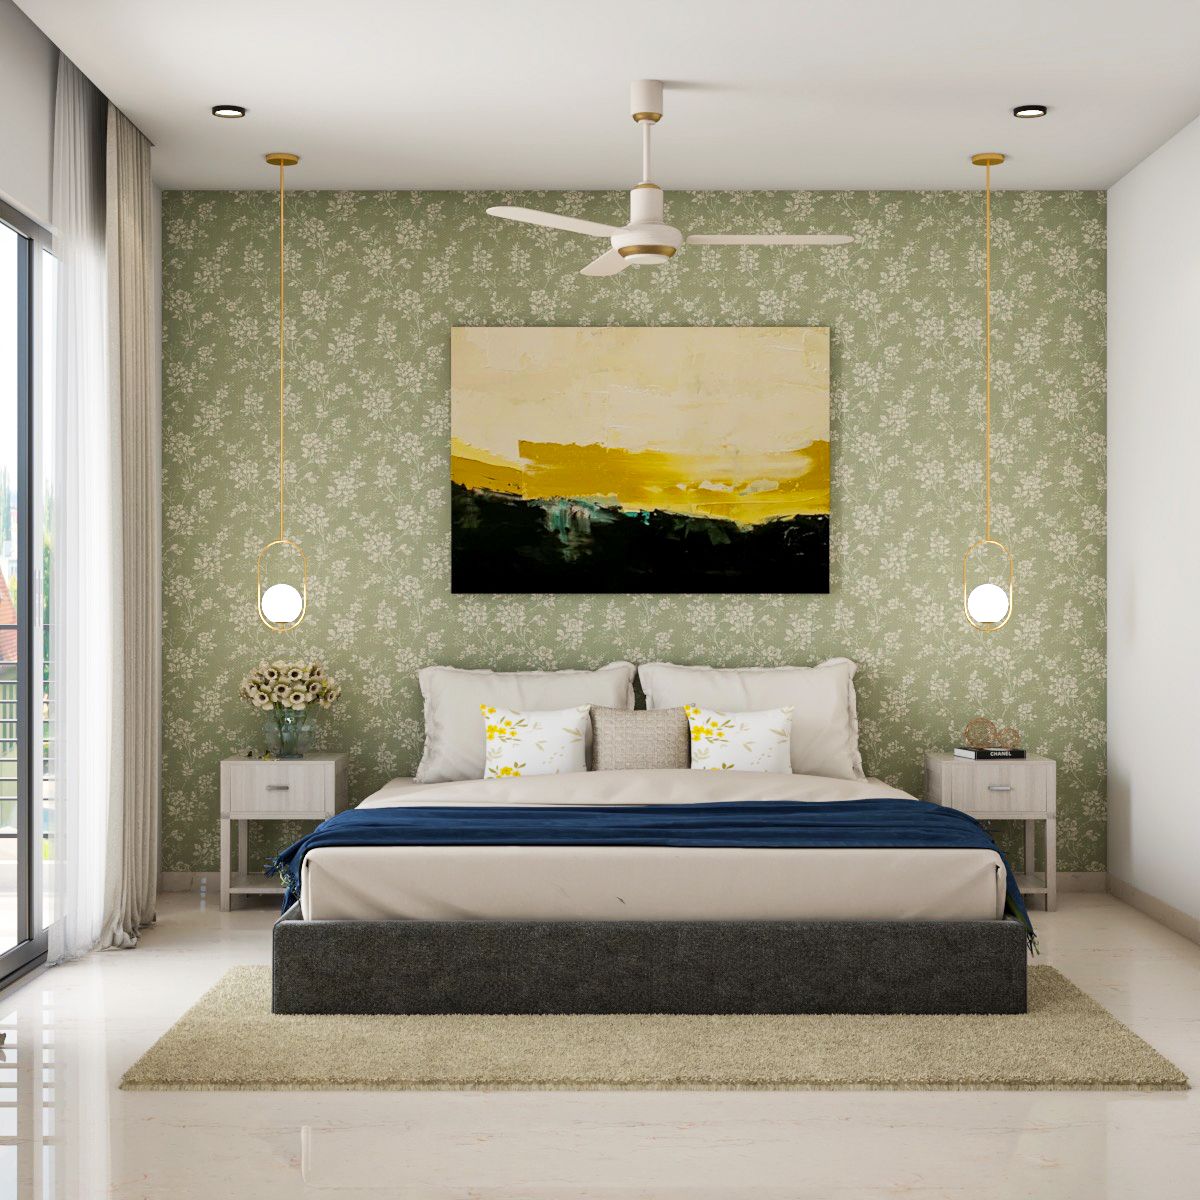 Contemporary Guest Bedroom With Floral Wallpaper